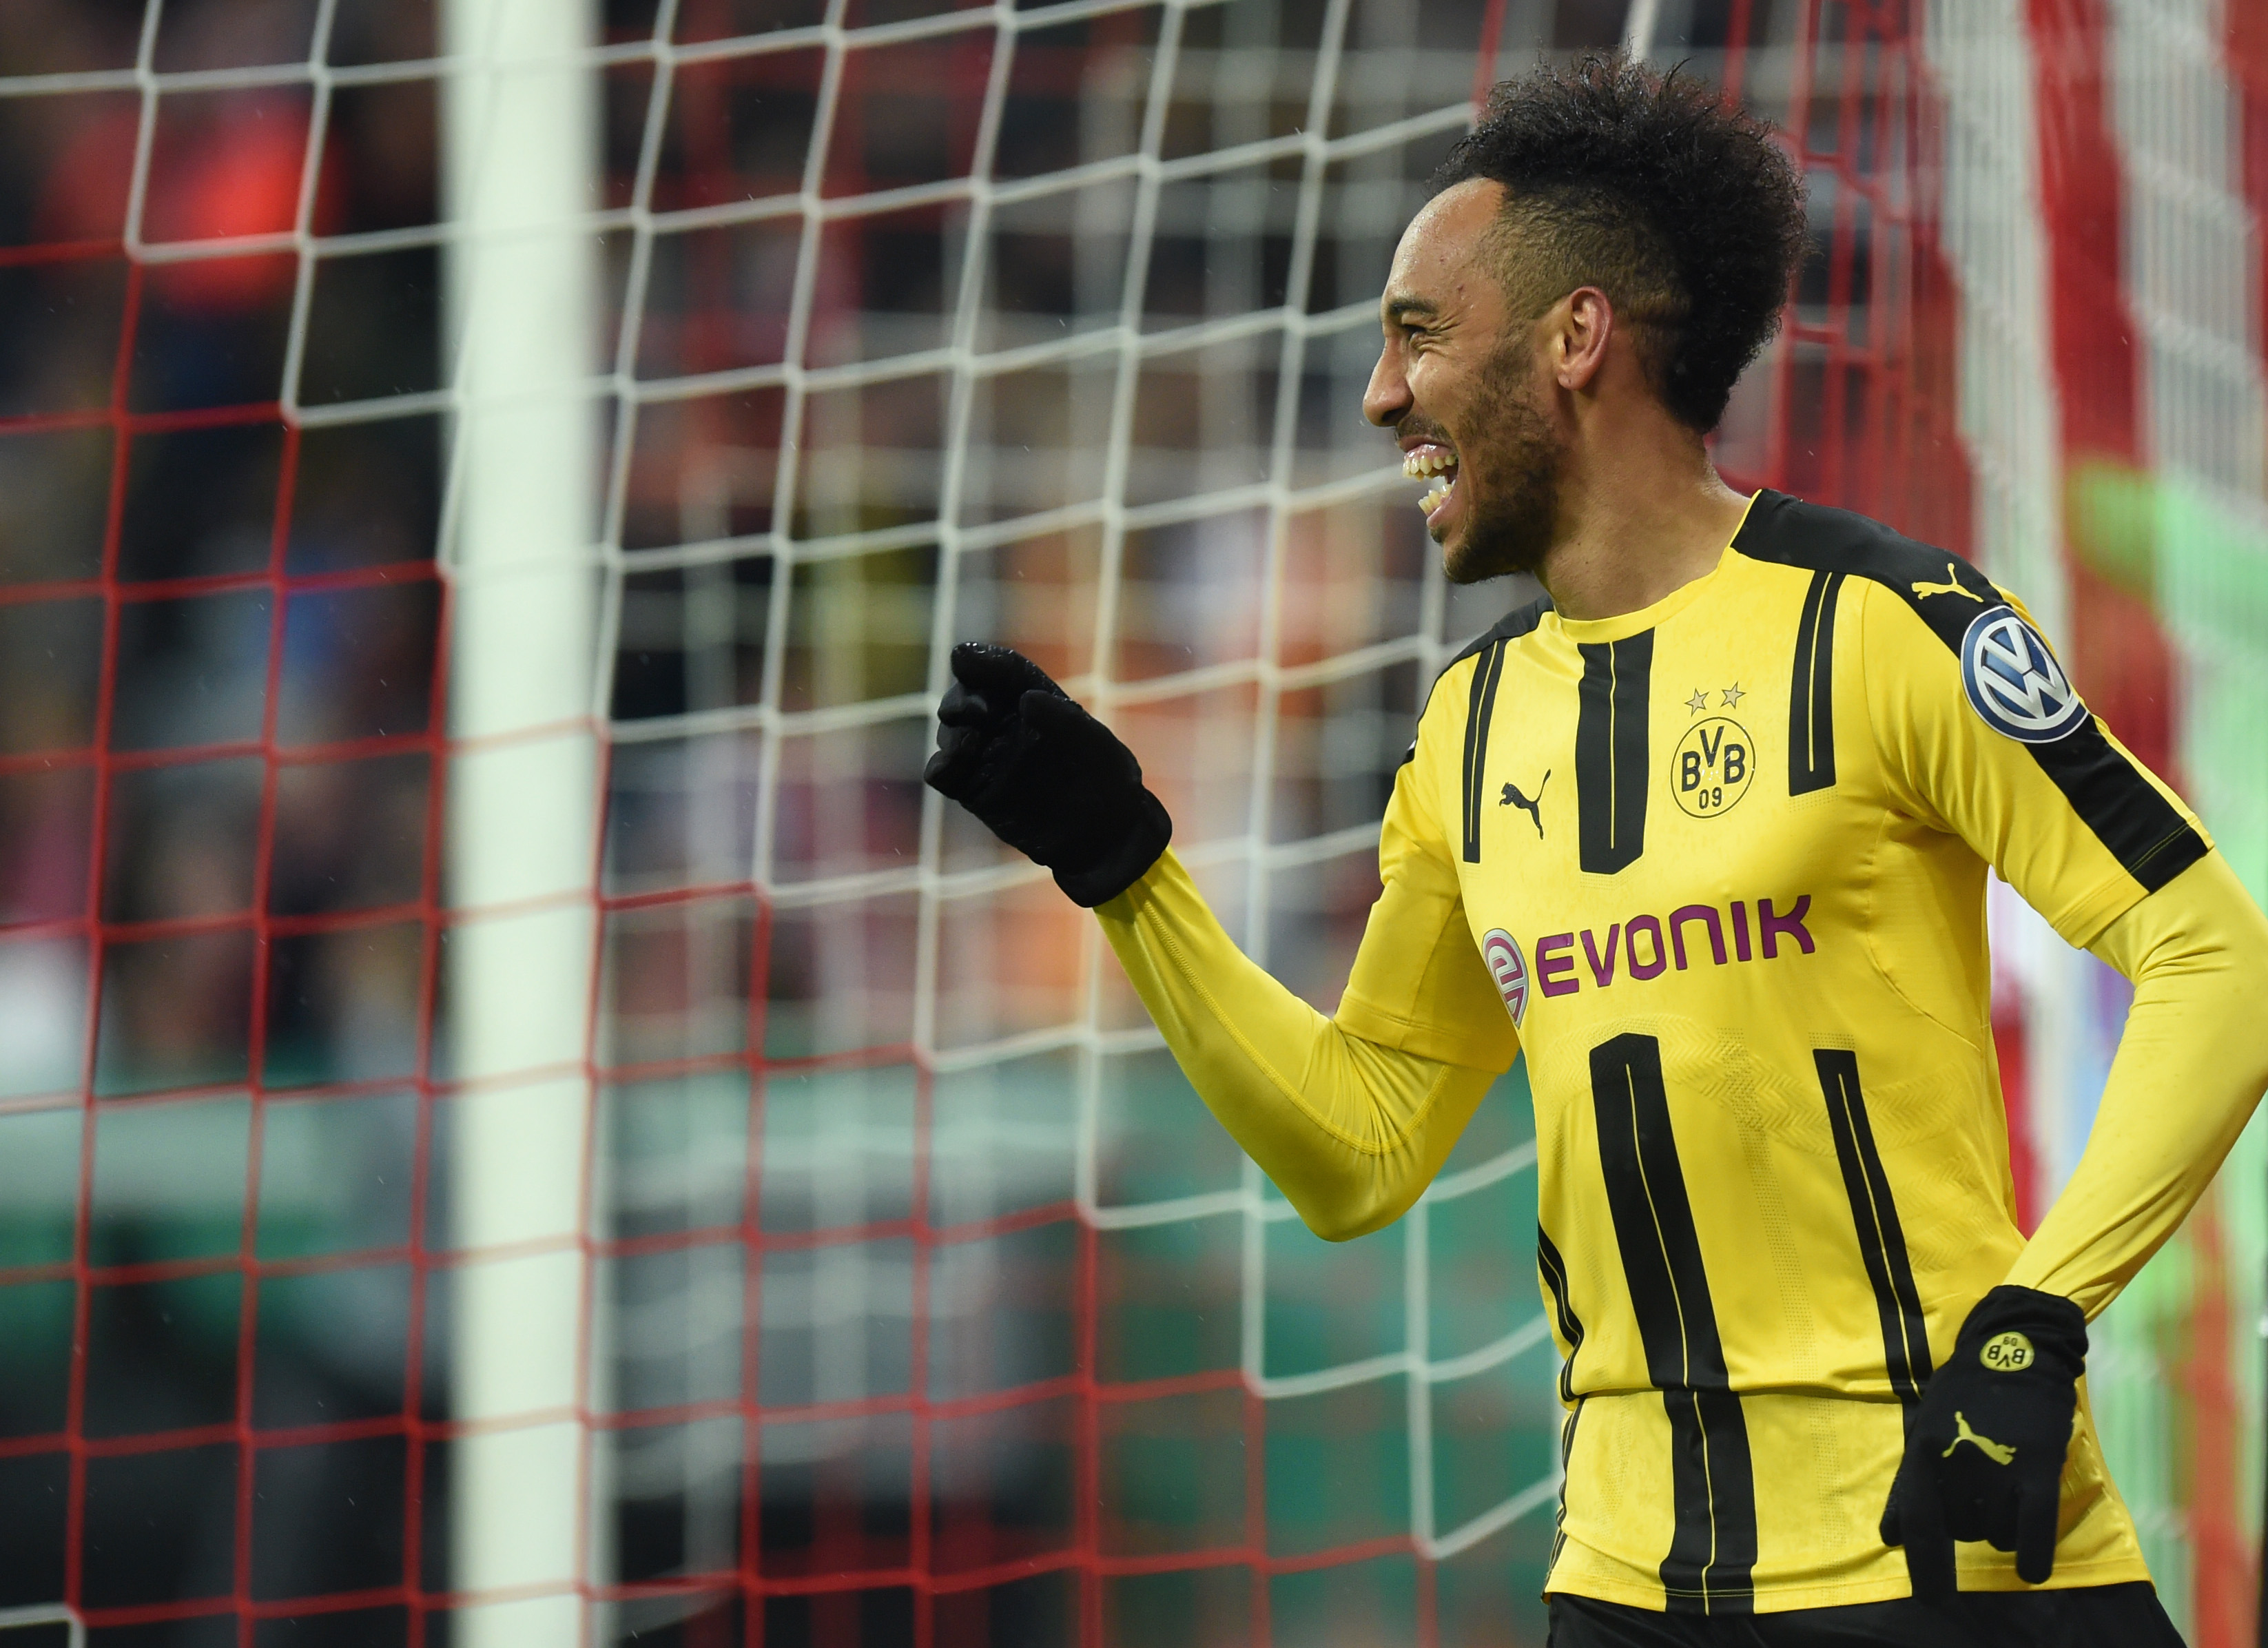 Dortmund's Gabonese striker Pierre-Emerick Aubameyang celebrates after the second goal during the German Cup DFB Pokal semifinal football match between FC Bayern Munich and BVB Borussia Dortmund in Munich, on April 26, 2017. / AFP PHOTO / Christof STACHE / RESTRICTIONS: ACCORDING TO DFB RULES IMAGE SEQUENCES TO SIMULATE VIDEO IS NOT ALLOWED DURING MATCH TIME. MOBILE (MMS) USE IS NOT ALLOWED DURING AND FOR FURTHER TWO HOURS AFTER THE MATCH. == RESTRICTED TO EDITORIAL USE == FOR MORE INFORMATION CONTACT DFB DIRECTLY AT +49 69 67880

 /         (Photo credit should read CHRISTOF STACHE/AFP/Getty Images)